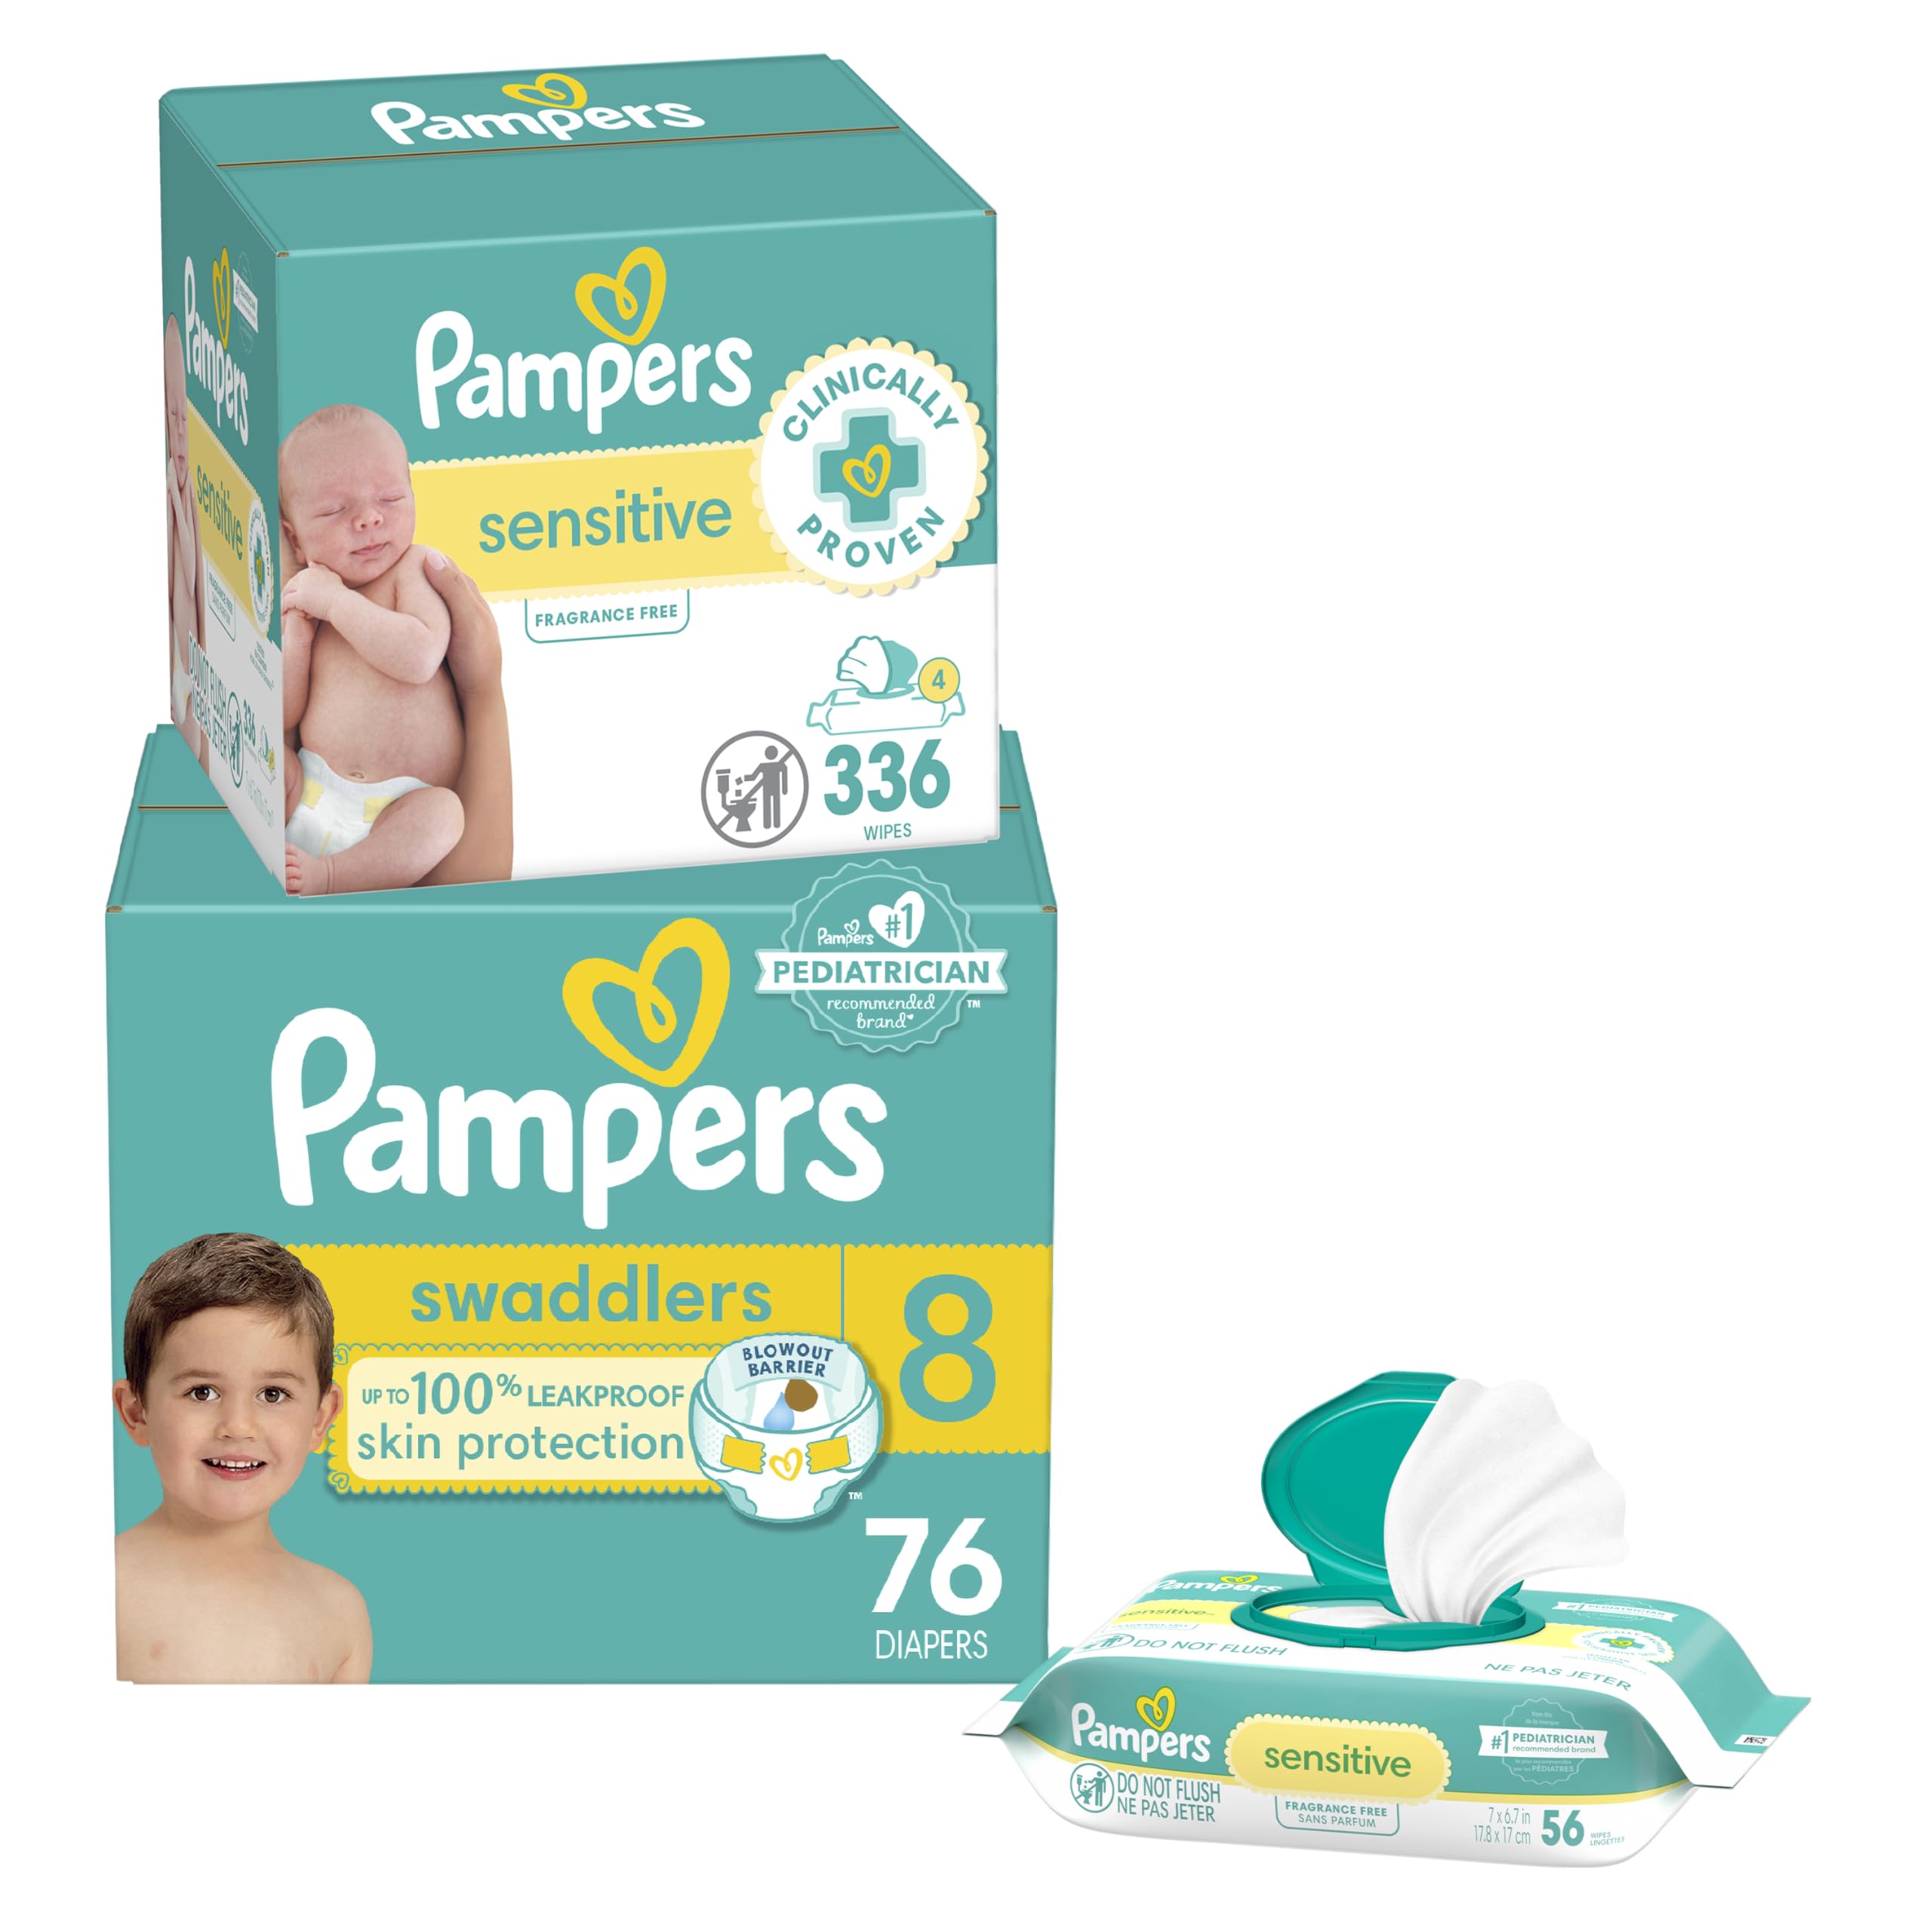 Diapers Size 8, 76 Count and Baby Wipes - Pampers Swaddlers Disposable Baby Diapers and Pampers Sensitive Baby Wipes - 84 Count